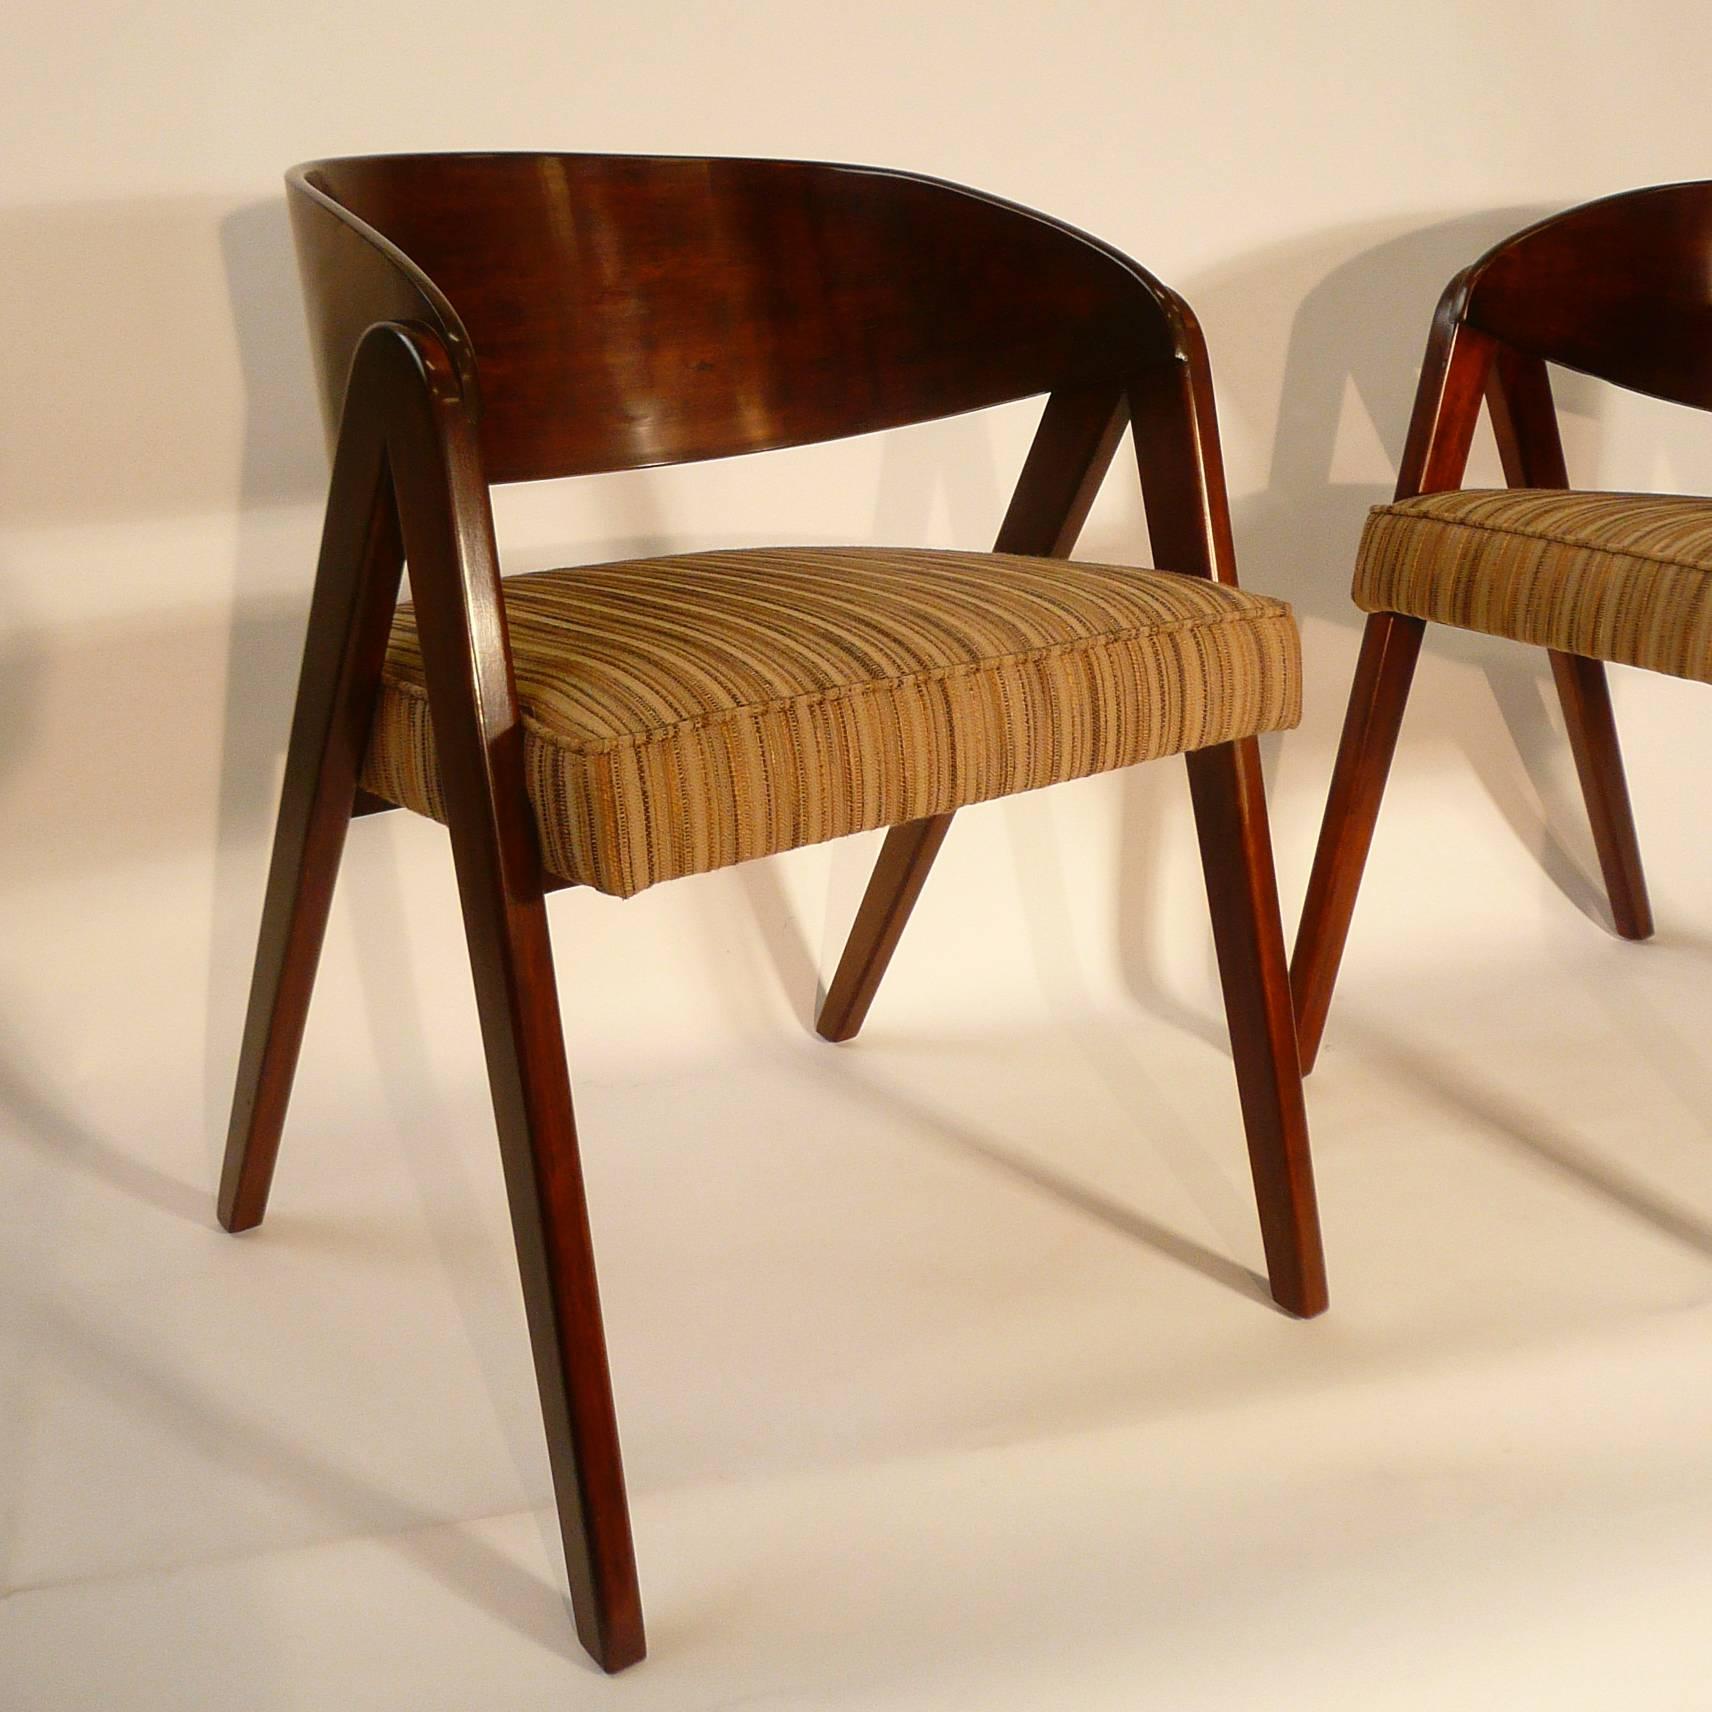 Pair of walnut compass chairs by Allan Gould for Herman Miller are fully restored with textured linen blend seats.